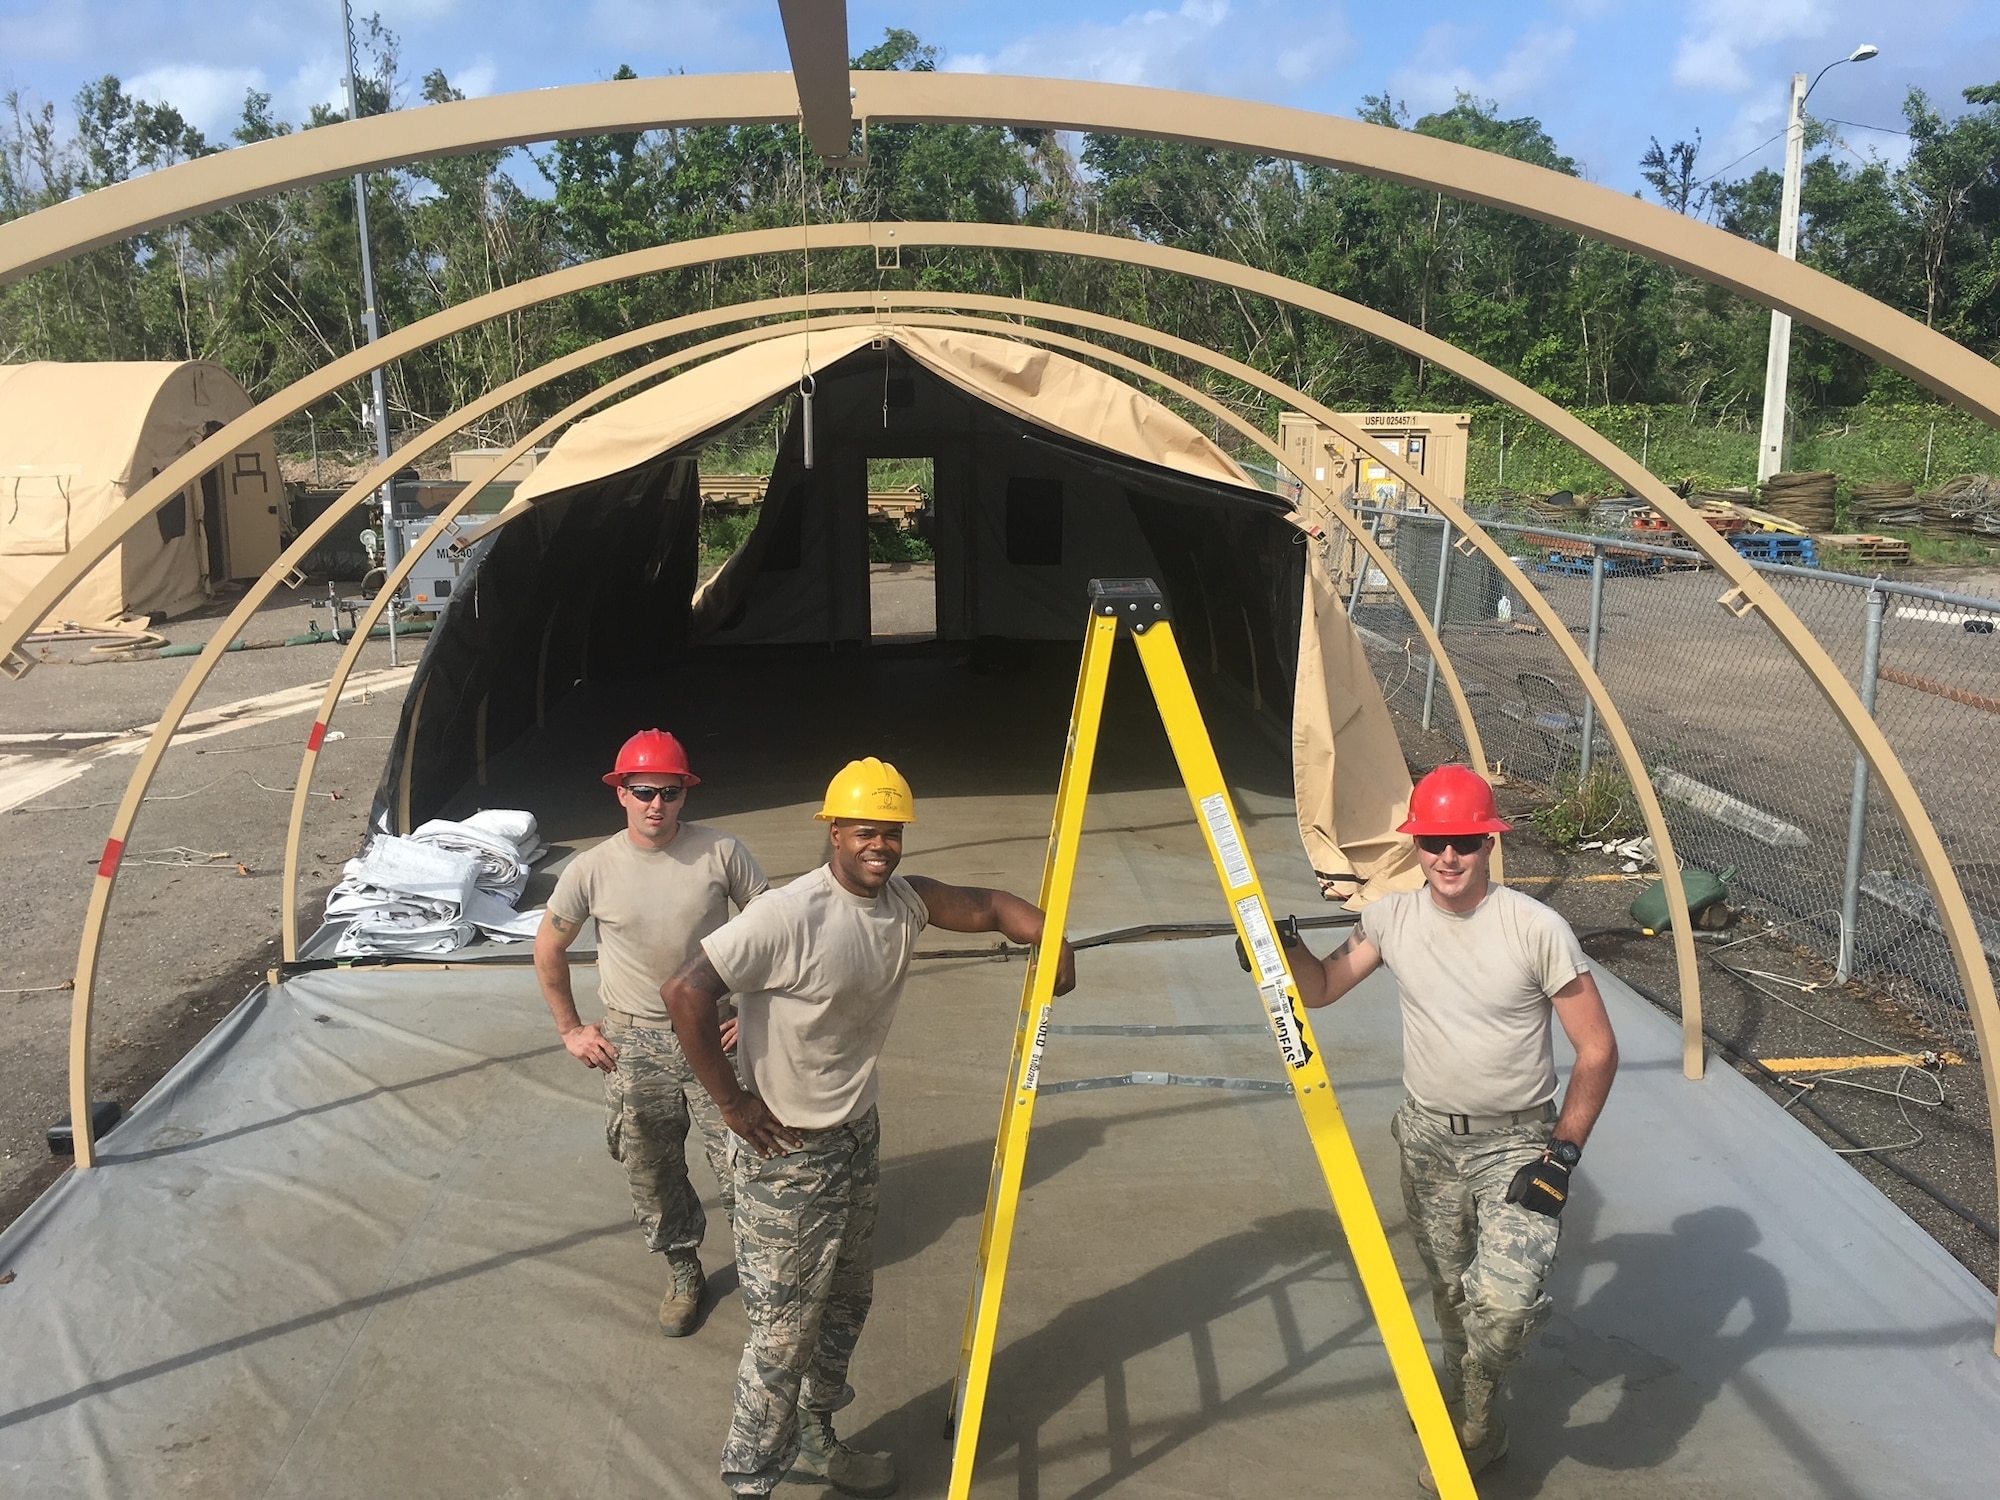 Civil Engineers from the 102nd Intelligence Wing, Otis Air National Guard Base, Cape Cod, Massachusetts, work at Camp Tortuguero, Vega Baja, Puerto Rico in December 2017. The National Guard was mobilized to provide disaster relief in the aftermath of Hurricane Maria.